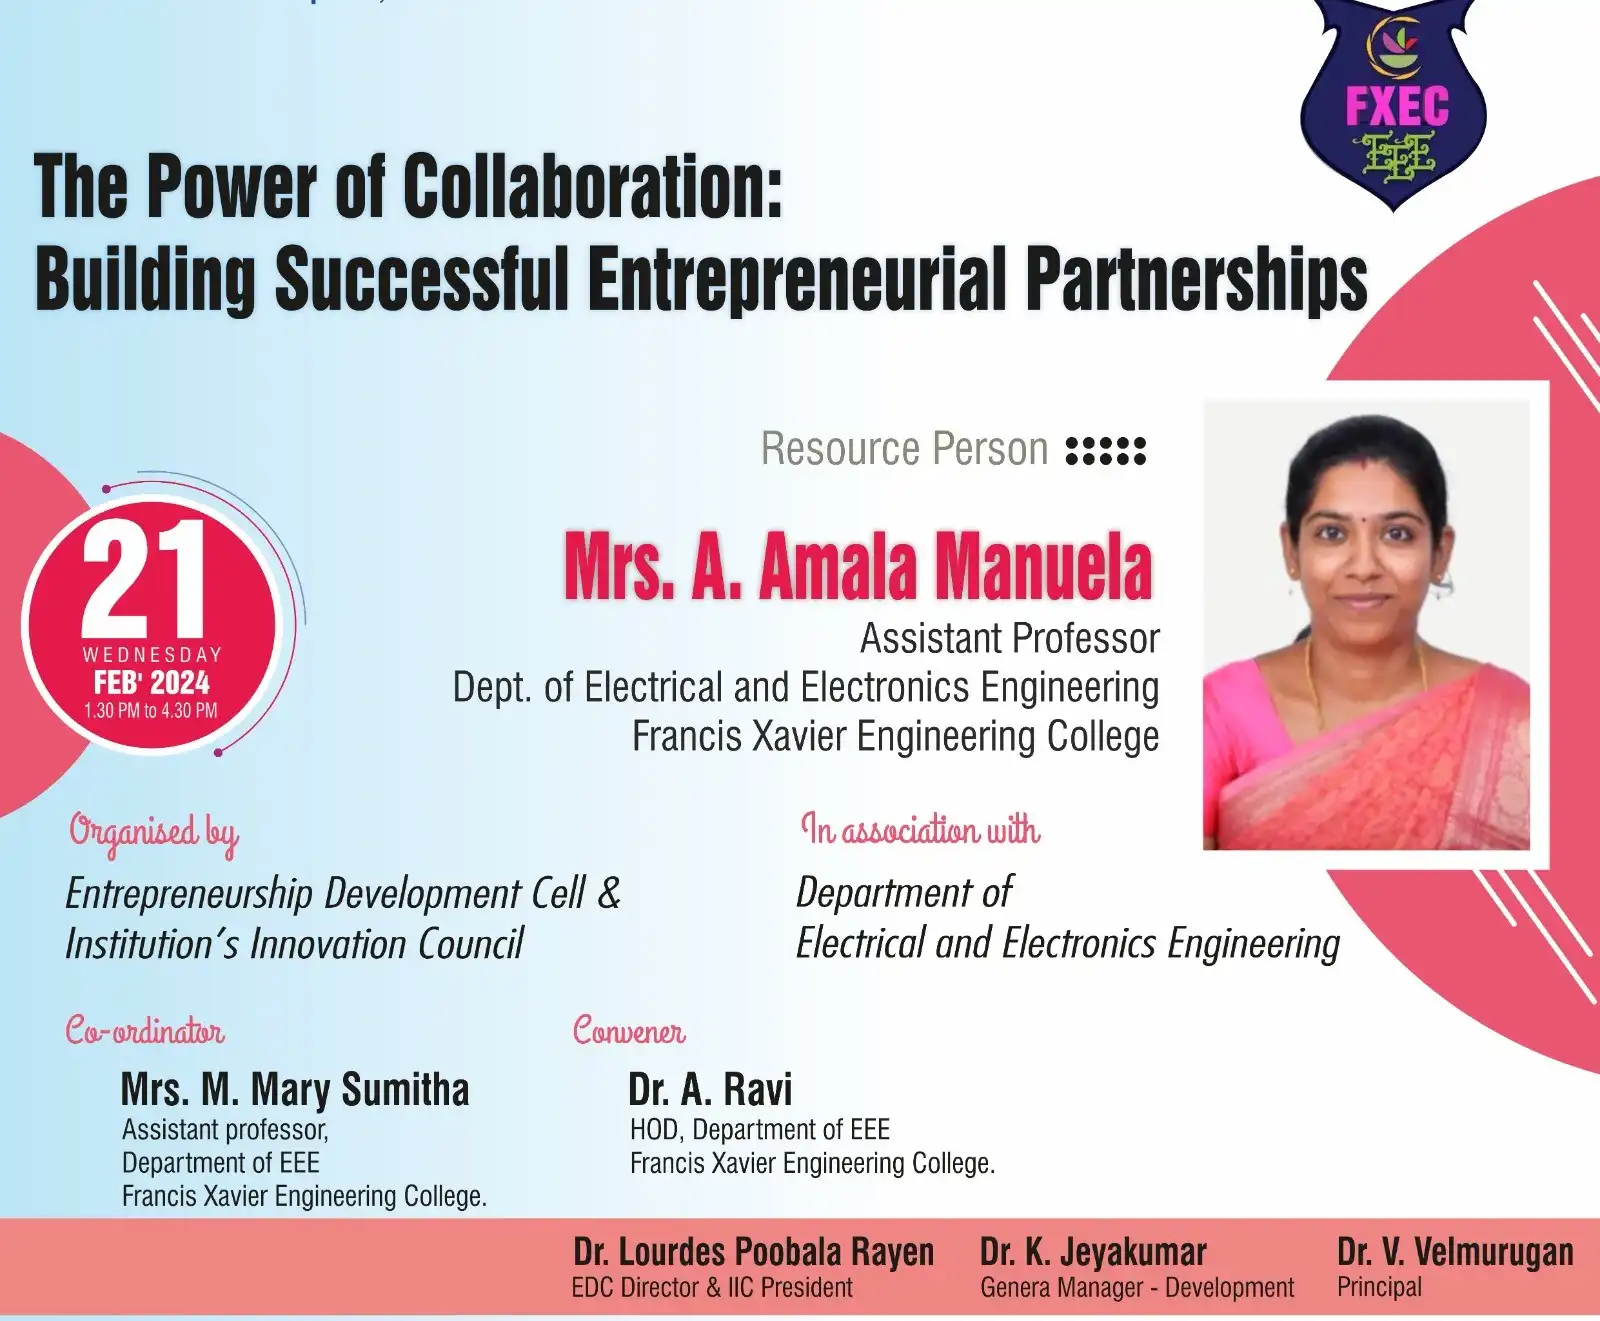 The Power of Collaboration: Building Successful Entrepreneurial Partnerships 